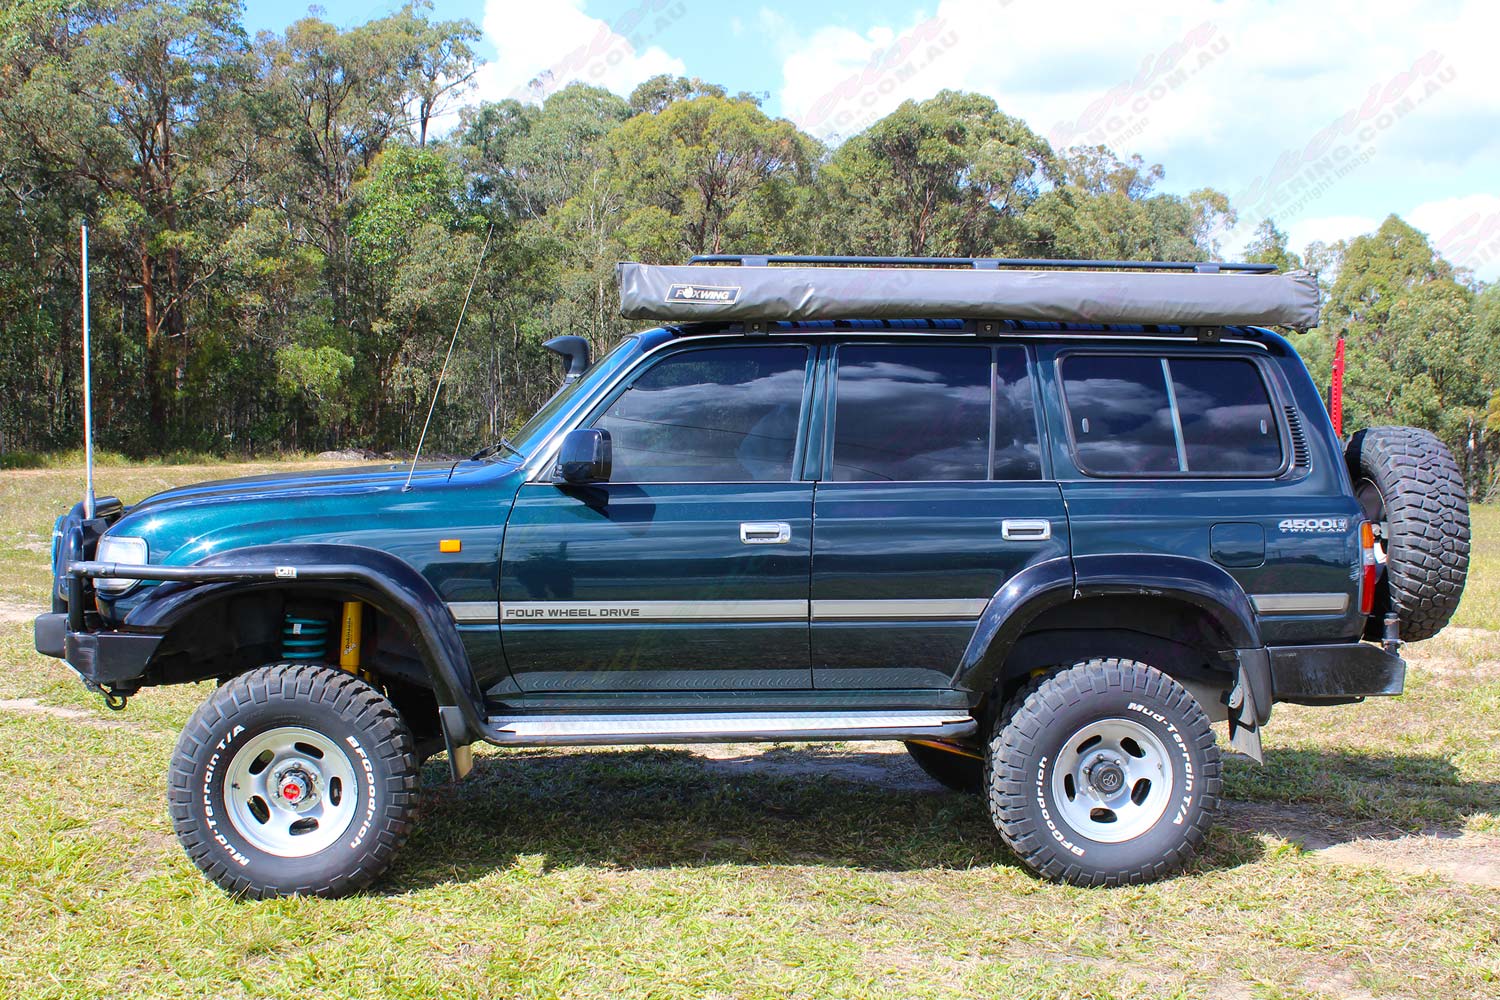 Left side view of a green 80 Series Toyota Landcruiser wagon fitted with dobinsons 4x4 4 inch coil springs and 6 inch shocks